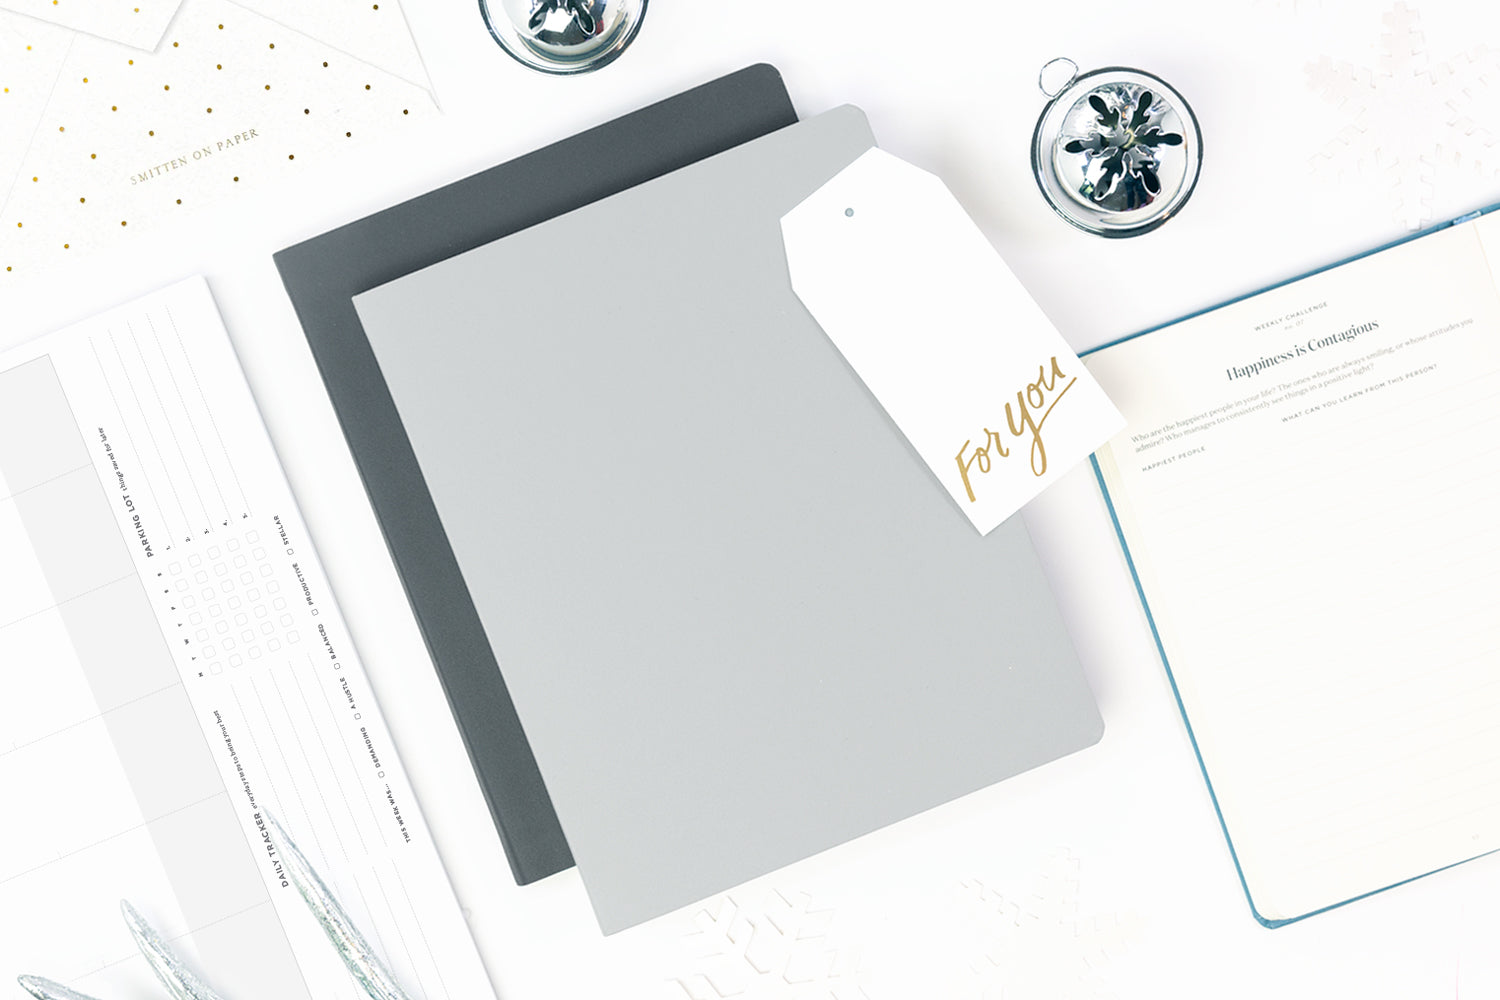 An array of elegant office gifts: a selection of grey notebooks, a white gift tag, and a slate blue journal open on a white tabletop.